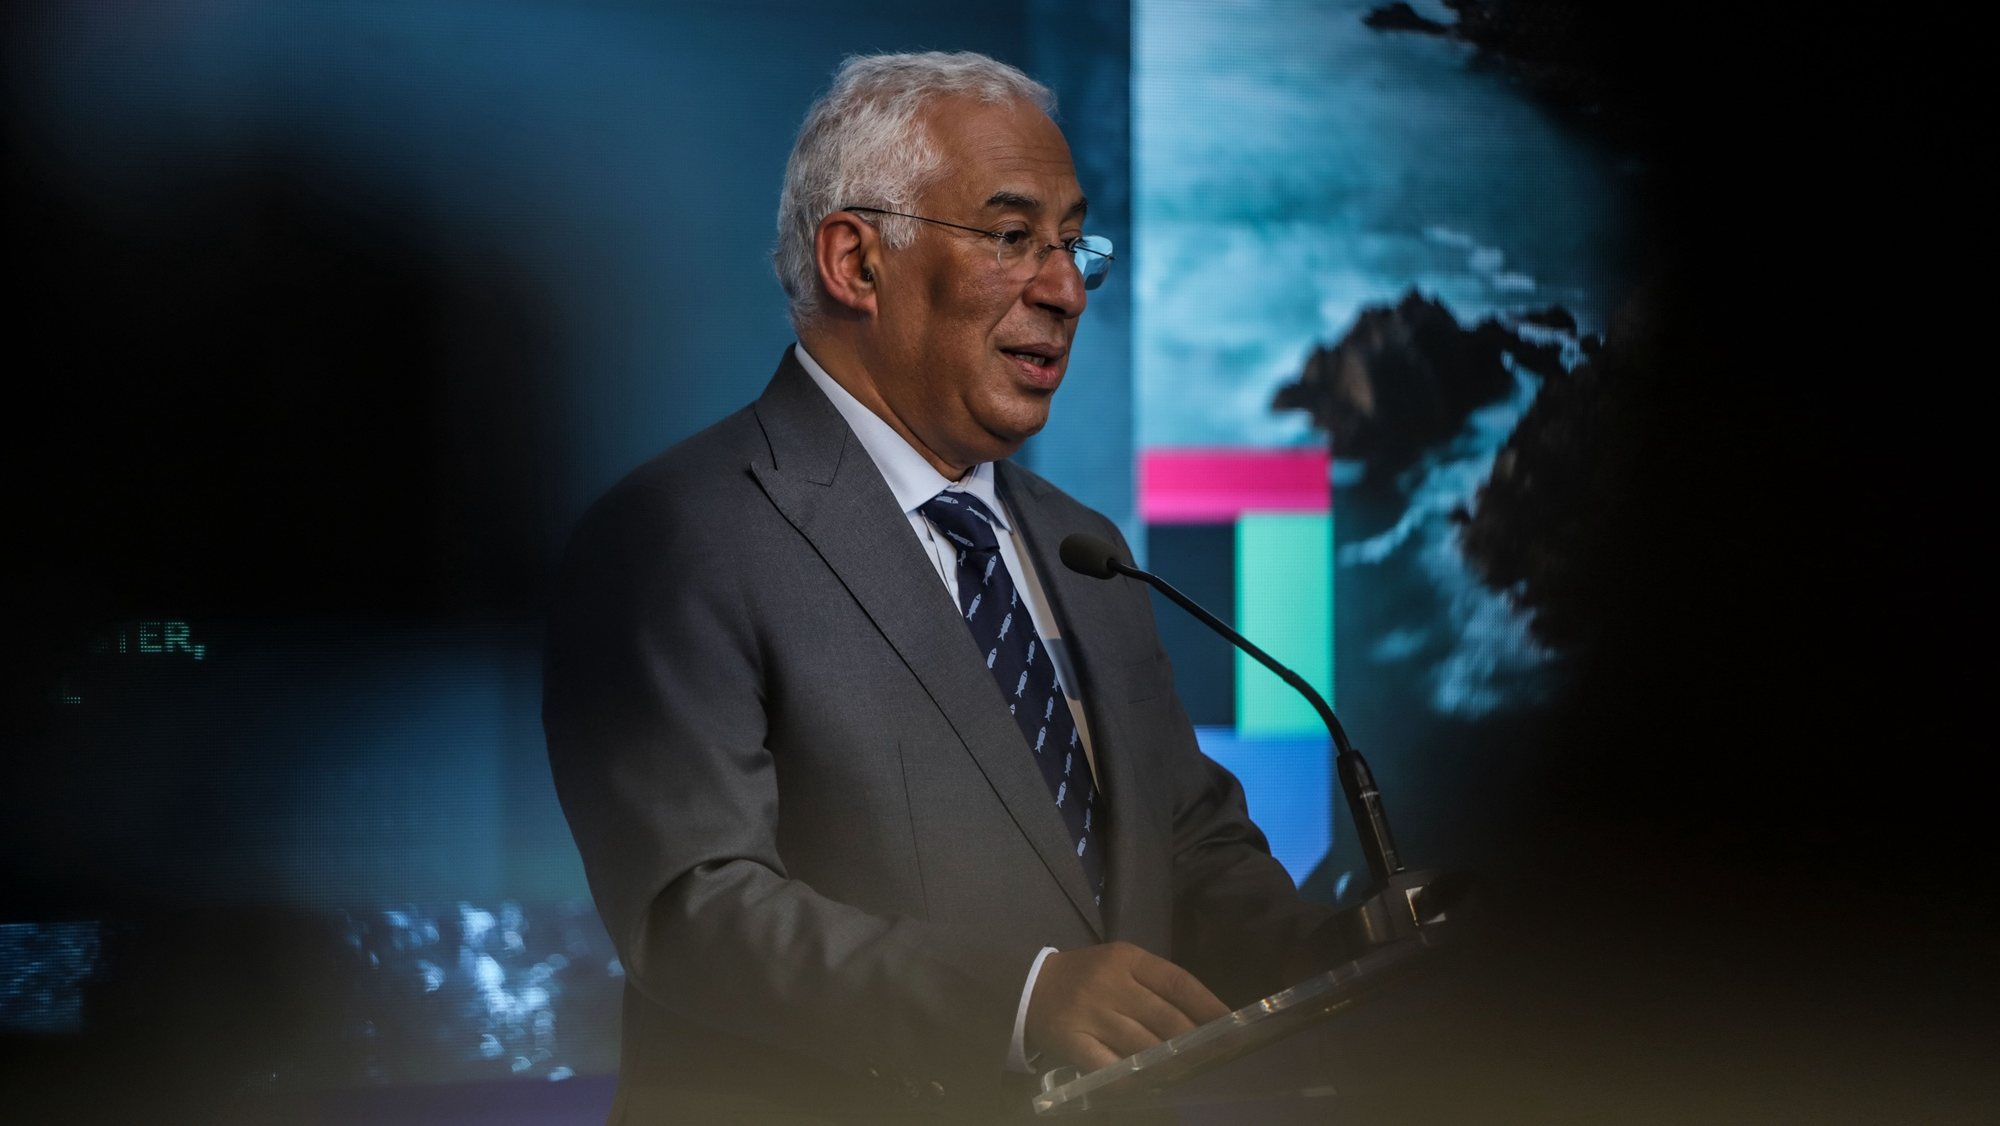 Portugal Prime Minister Antonio Costa address participants of The Ocean Race Summit in Mindelo, Sao Vicente island, Cape Verde, 23 January 2023. The Ocean Race Summit Mindelo is part of a series of events that bring together the unique perspectives of sailors who have ocean experiences. They are the key drivers for new measures and commitments to address and combat the serious problems at sea. ELTON MONTEIRO/LUSA